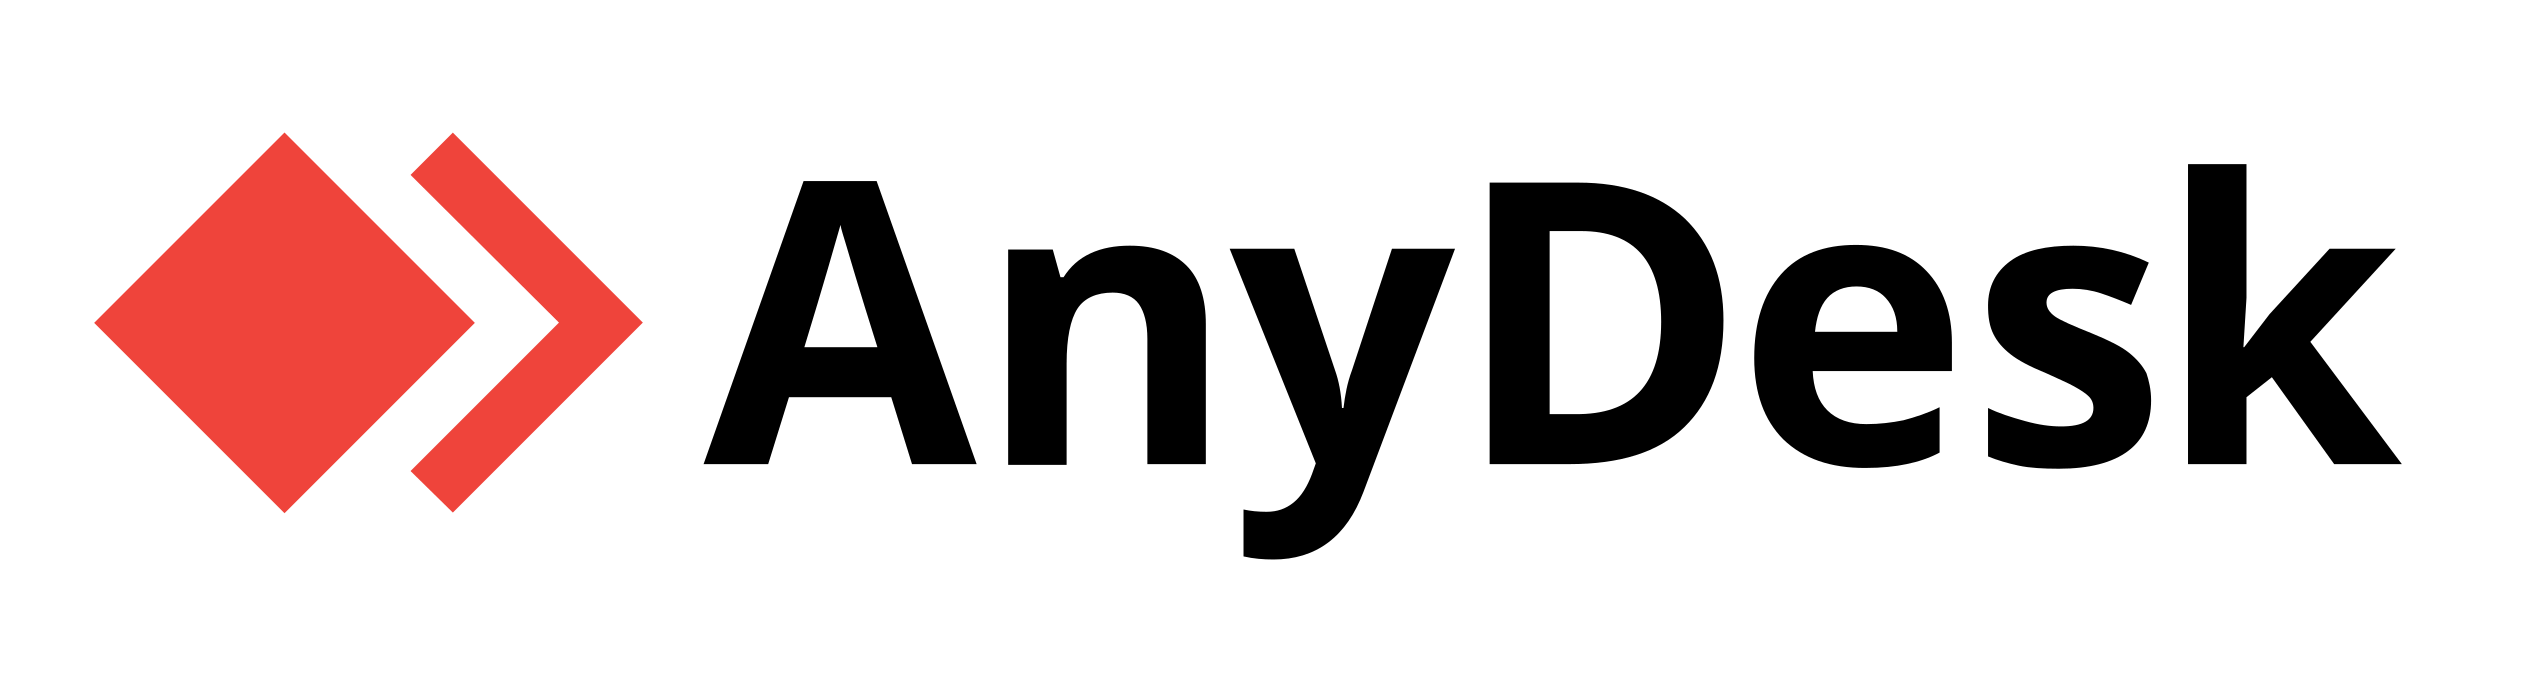 Kinetic Servers Provides Remote Access and Support over the Internet with AnyDesk